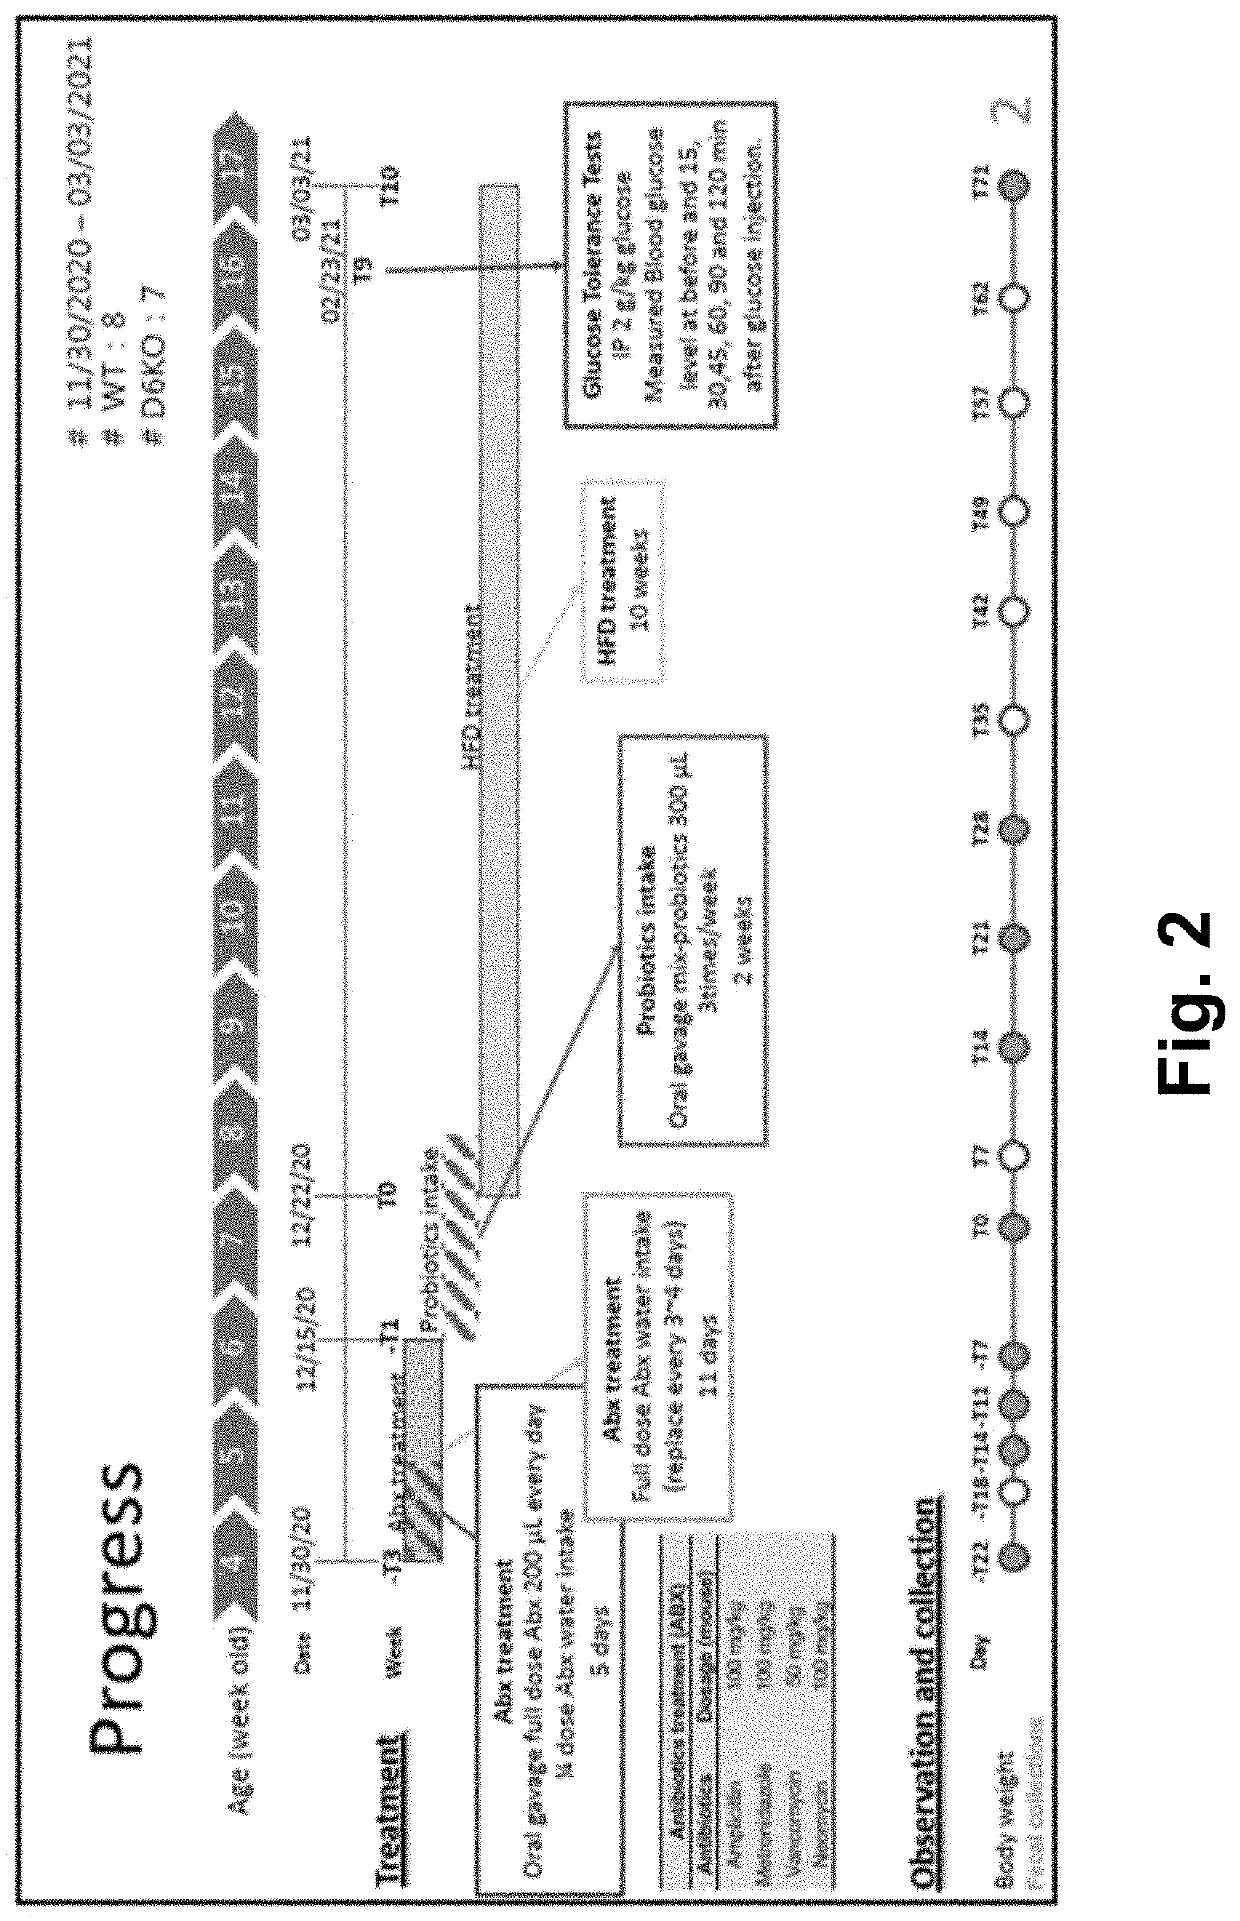 Blood glucose control and Anti-obesity probiotics compositions in a specific selection and ratio